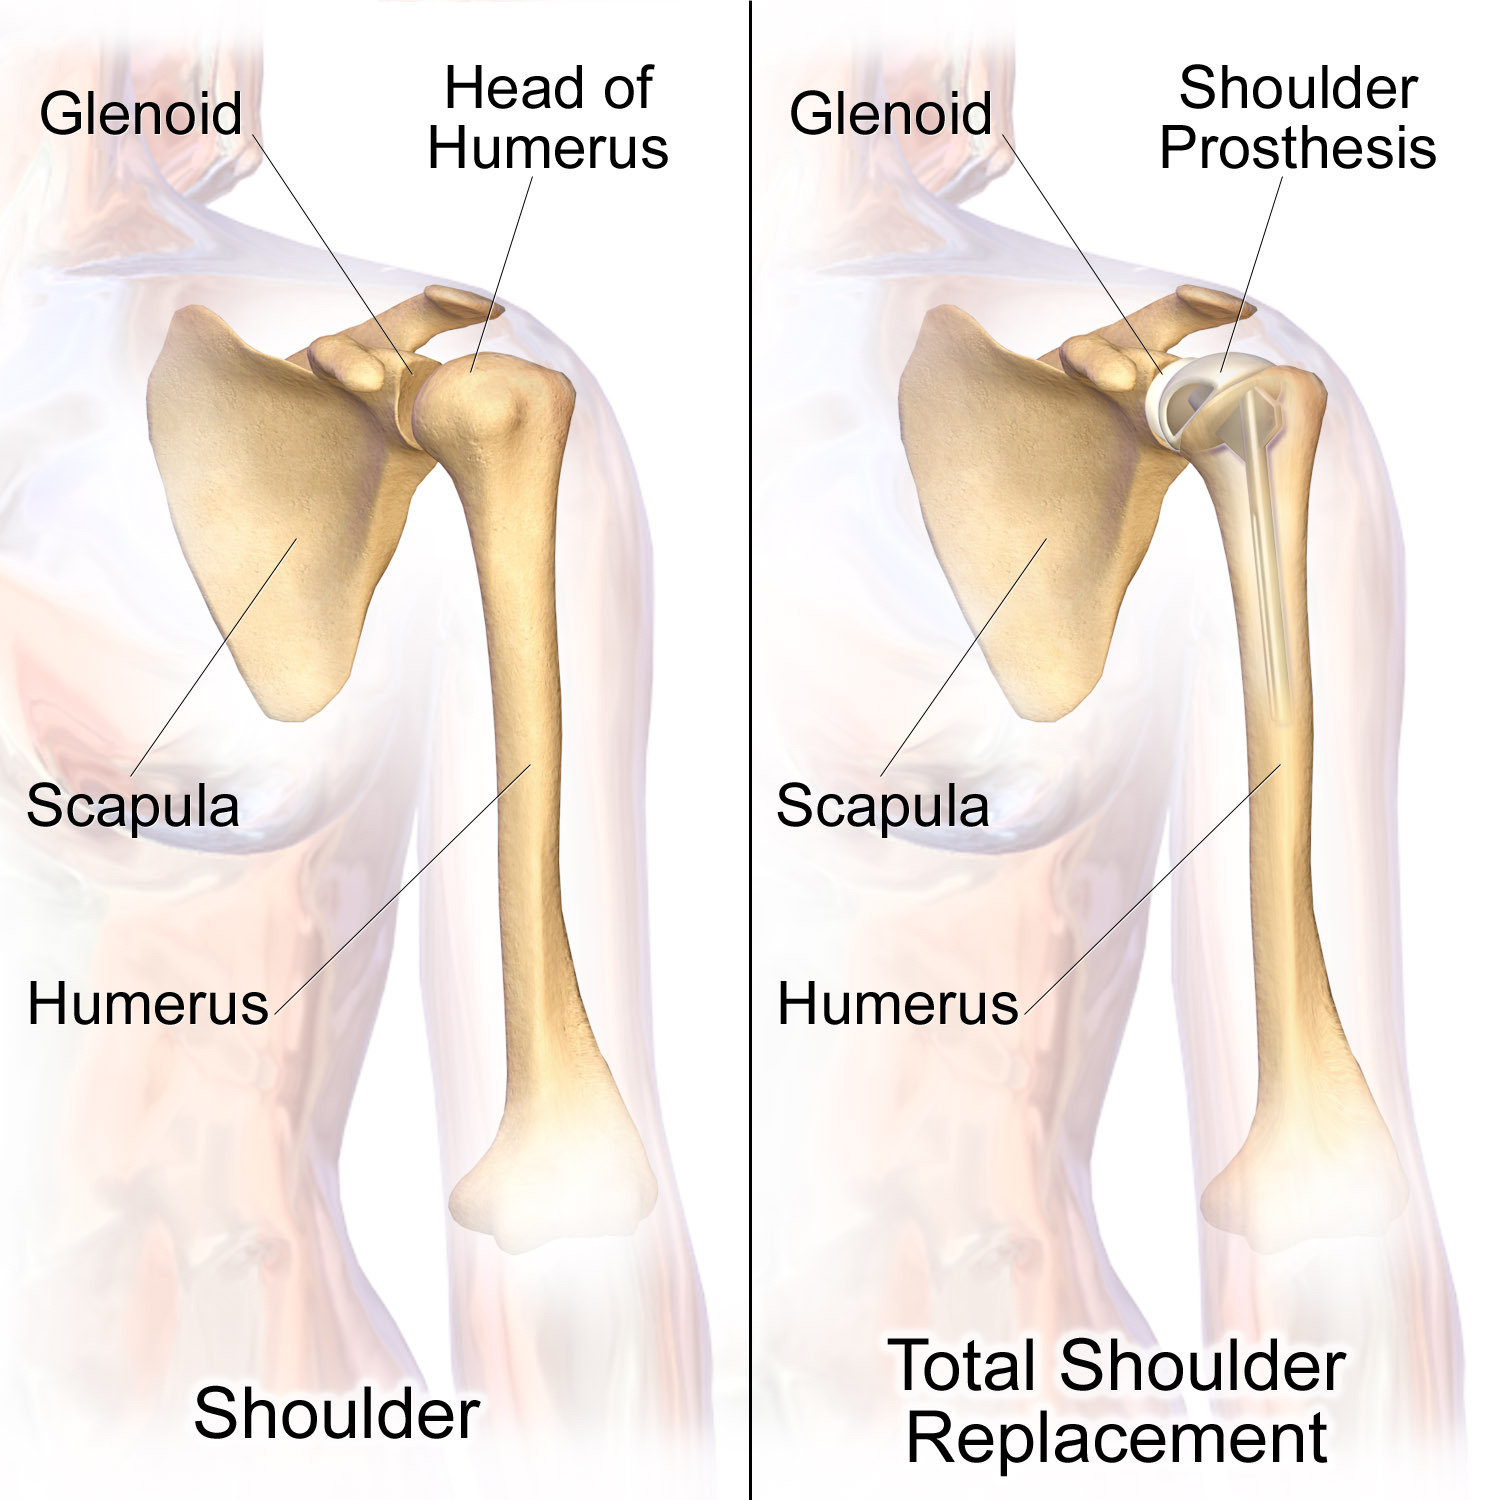 Can Younger Adults Benefit from Shoulder Replacement Surgery?